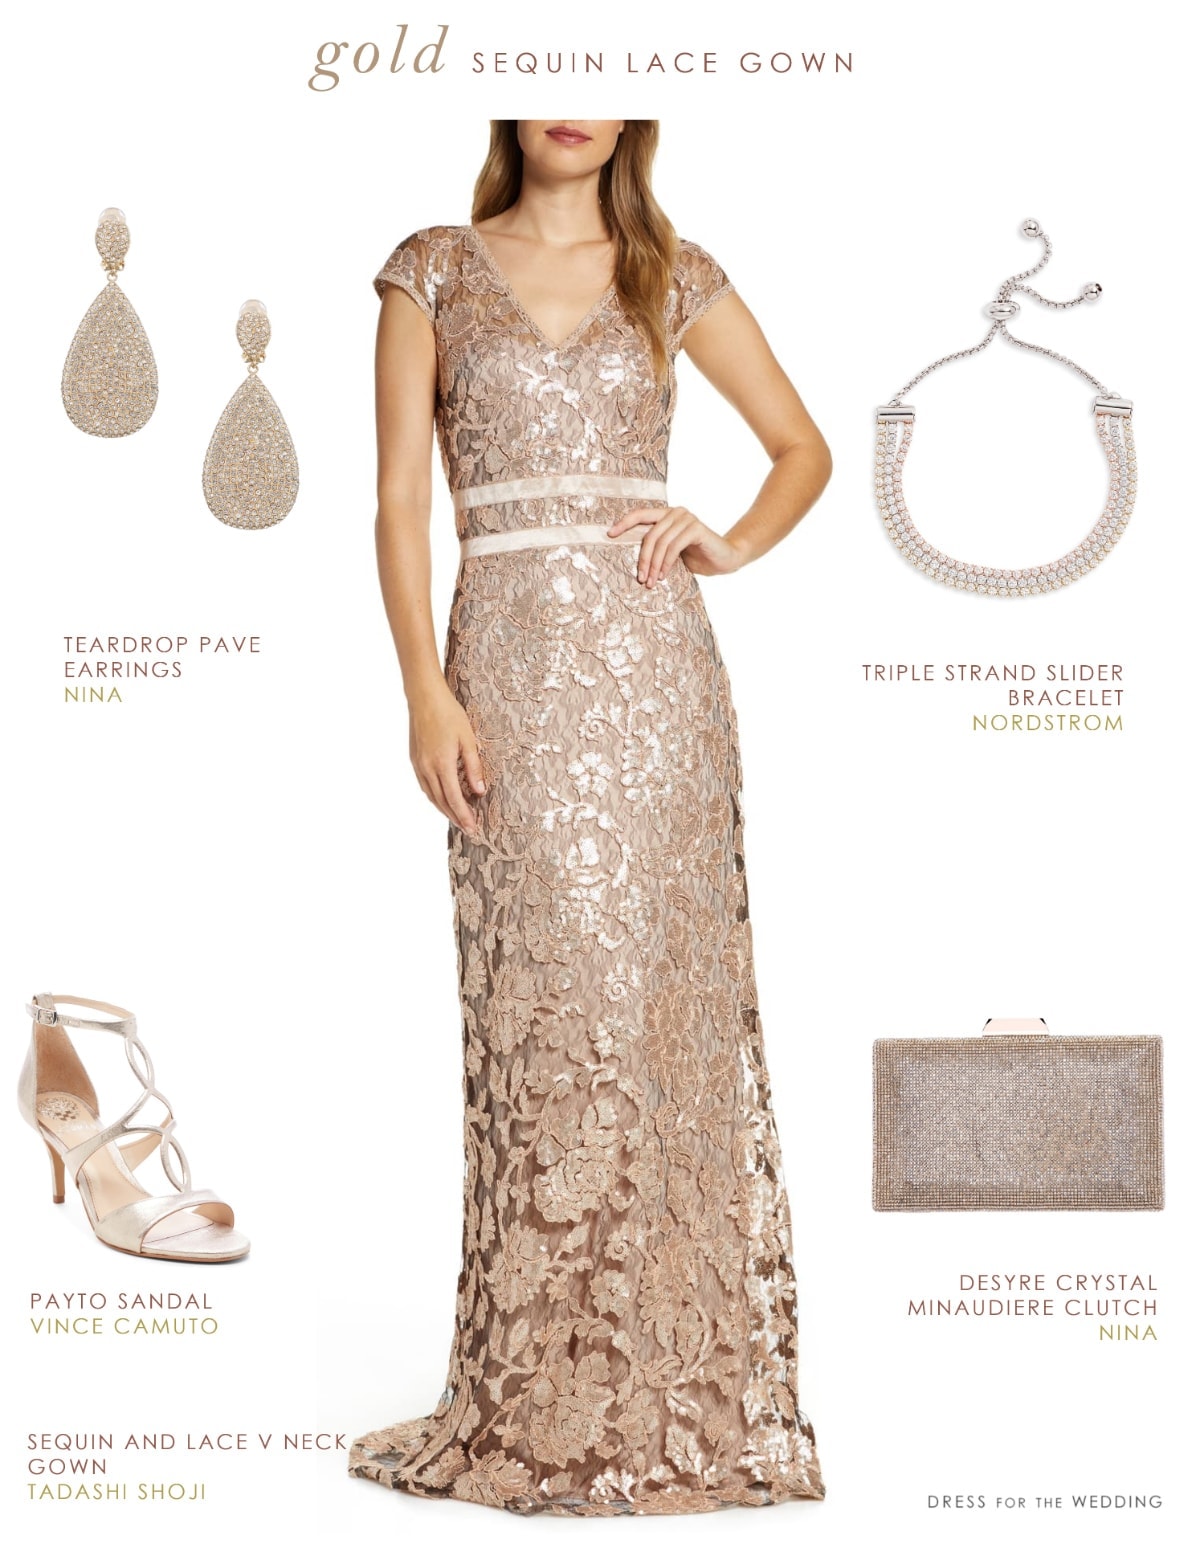 Gold Sequin and Lace Gown for Mother-of-the-Bride - Dress for the Wedding